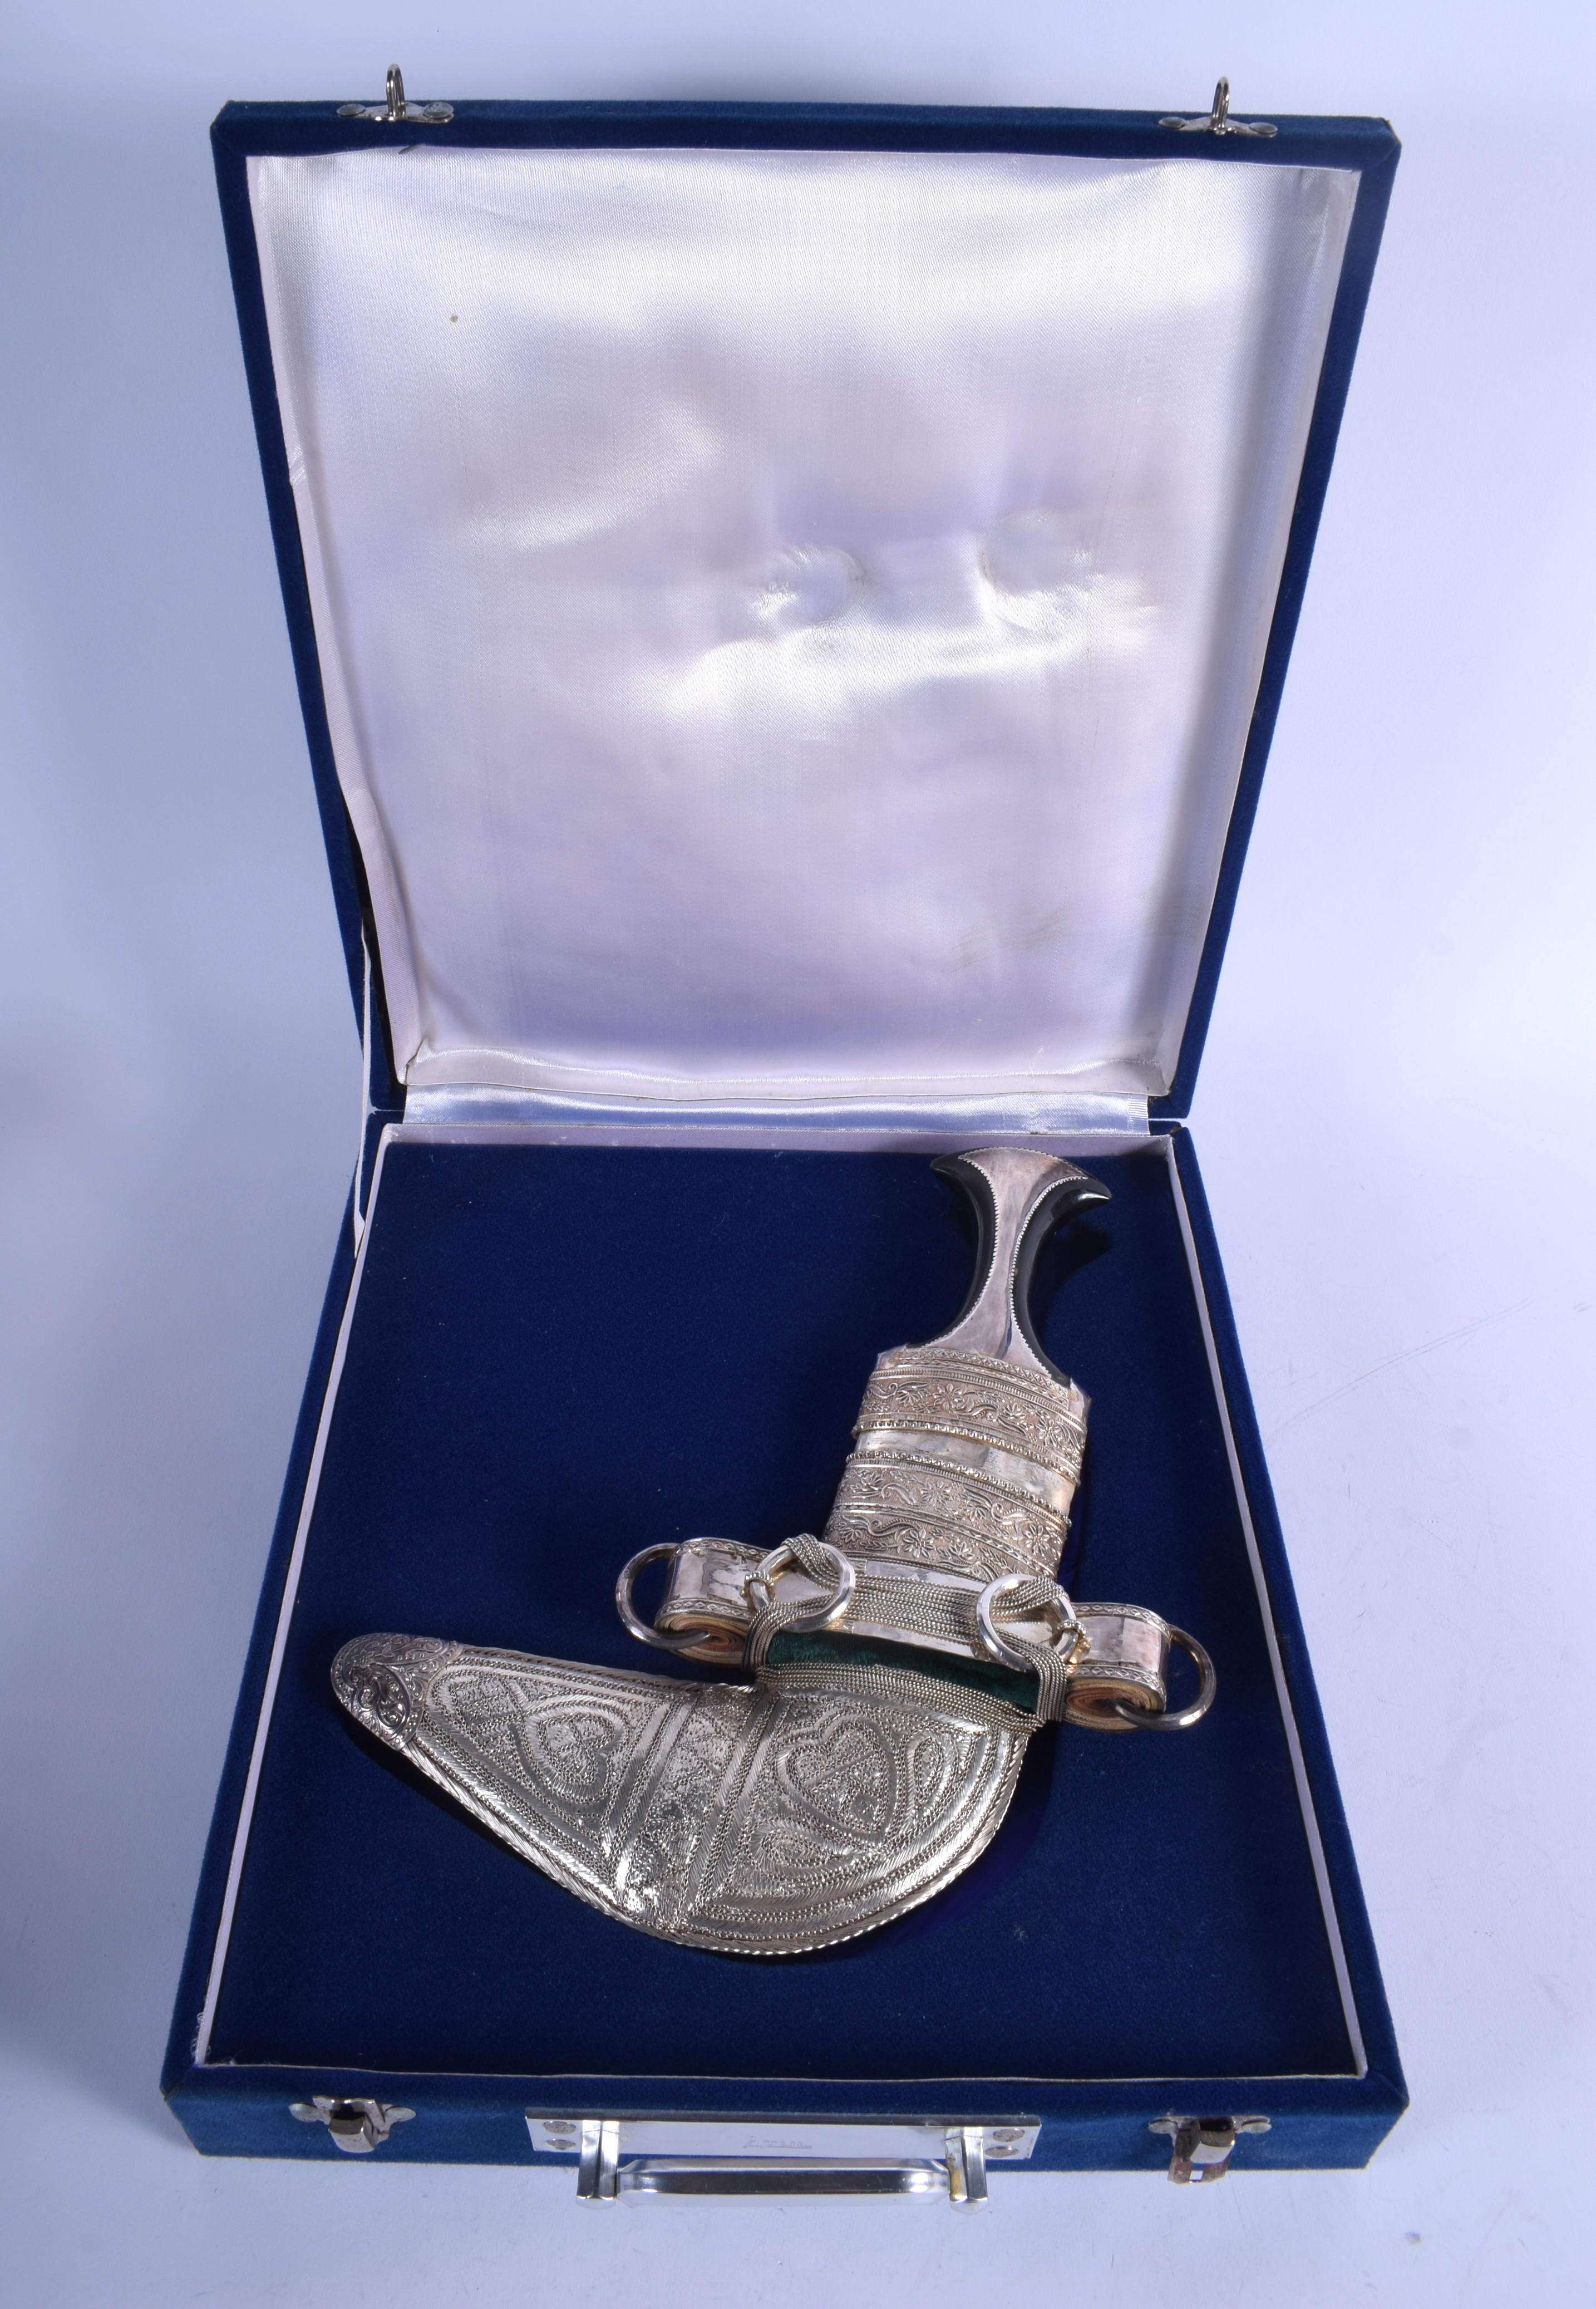 A BOXED EARLY 20TH CENTURY OMANI MIDDLE EASTERN WHITE METAL OVERLAID JAMBIYA DAGGER possibly with a